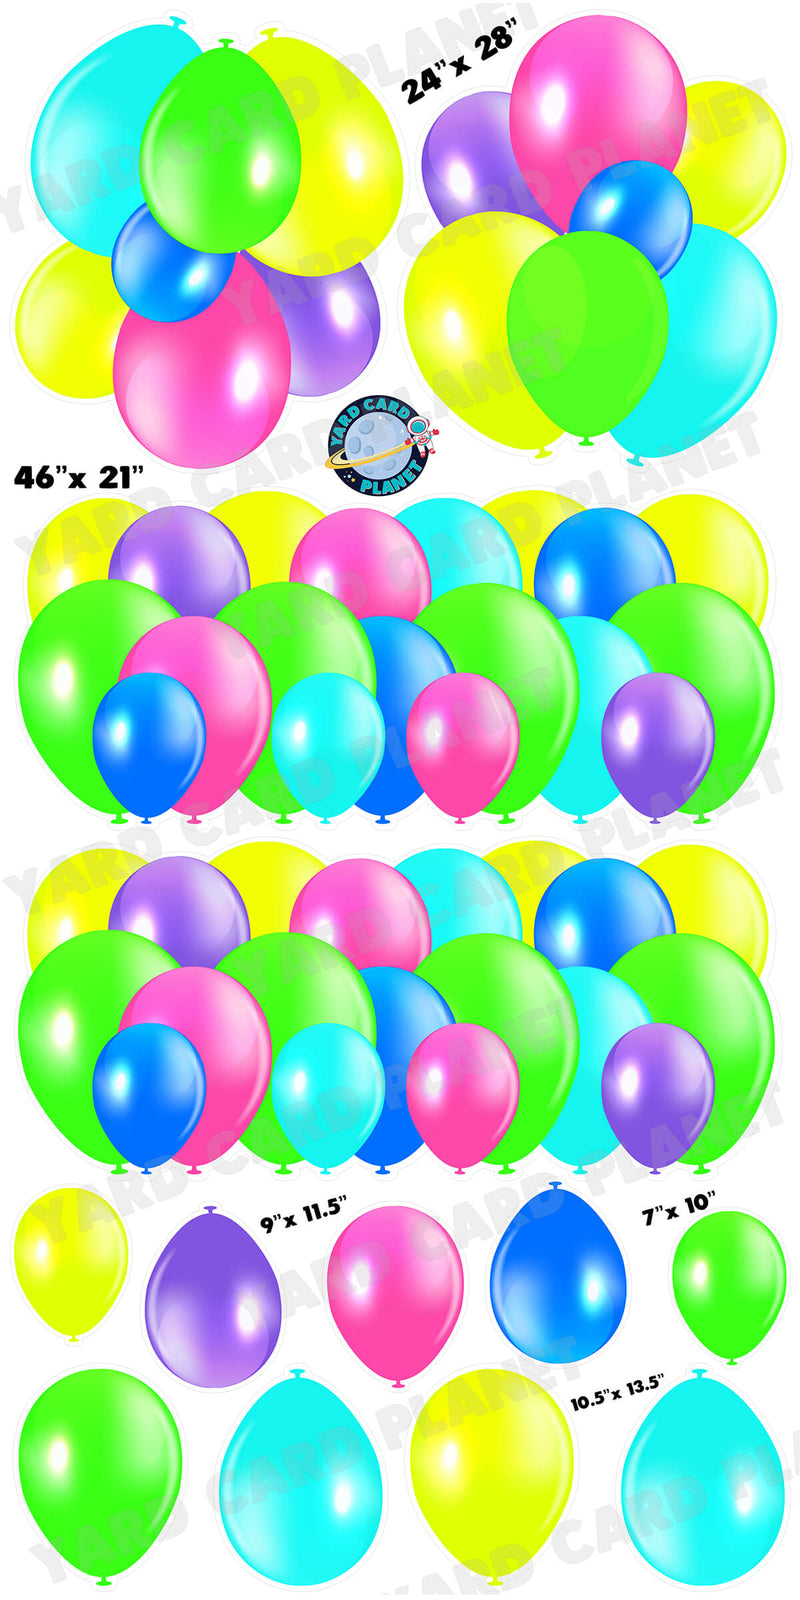 Multi Neon Colored Balloon Panels, Bouquets and Singles Yard Card Set